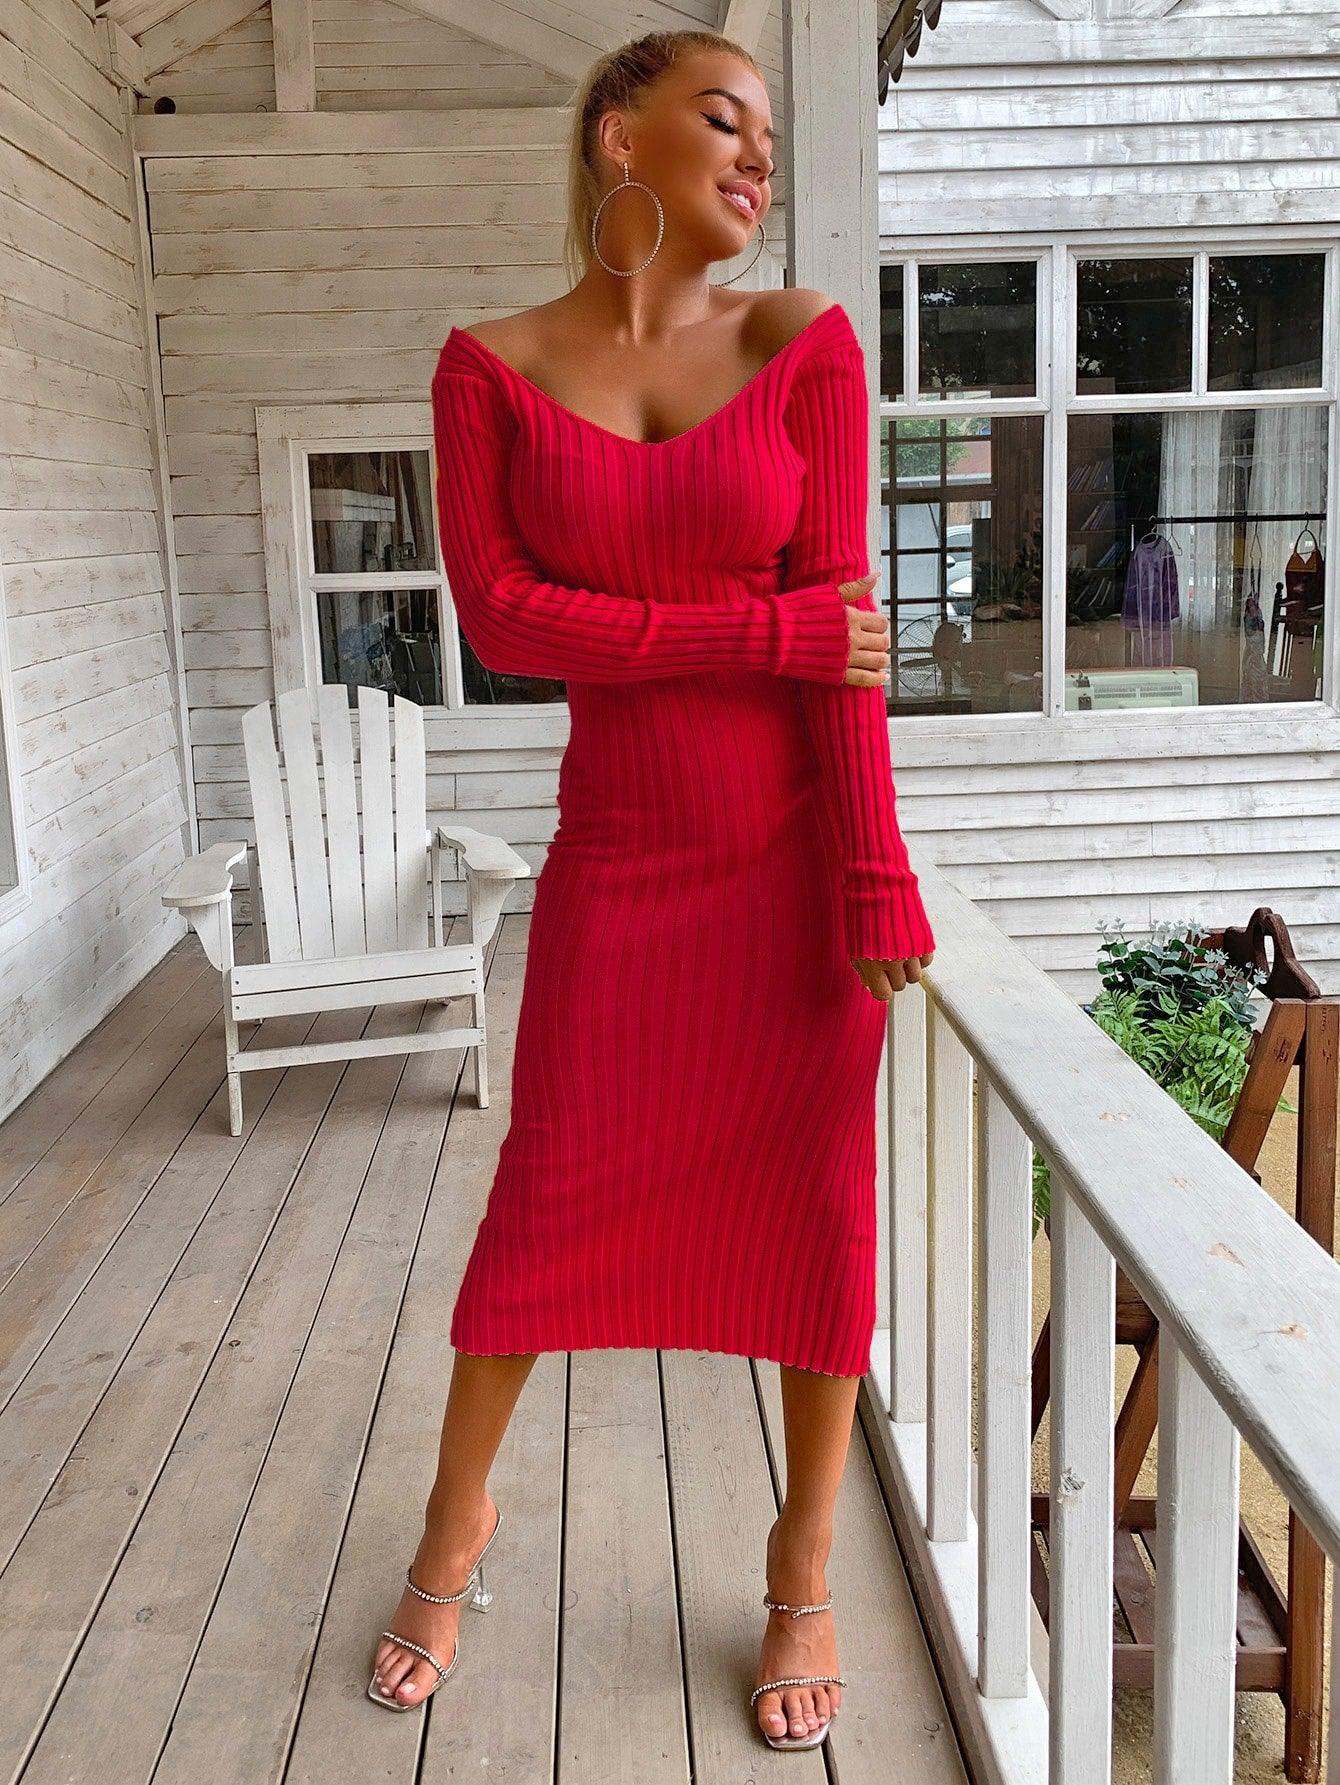 One Step Closer Ribbed Sweater Dress - midi red sweater dress with v neck and long sleeves. #Firefly Lane Boutique1